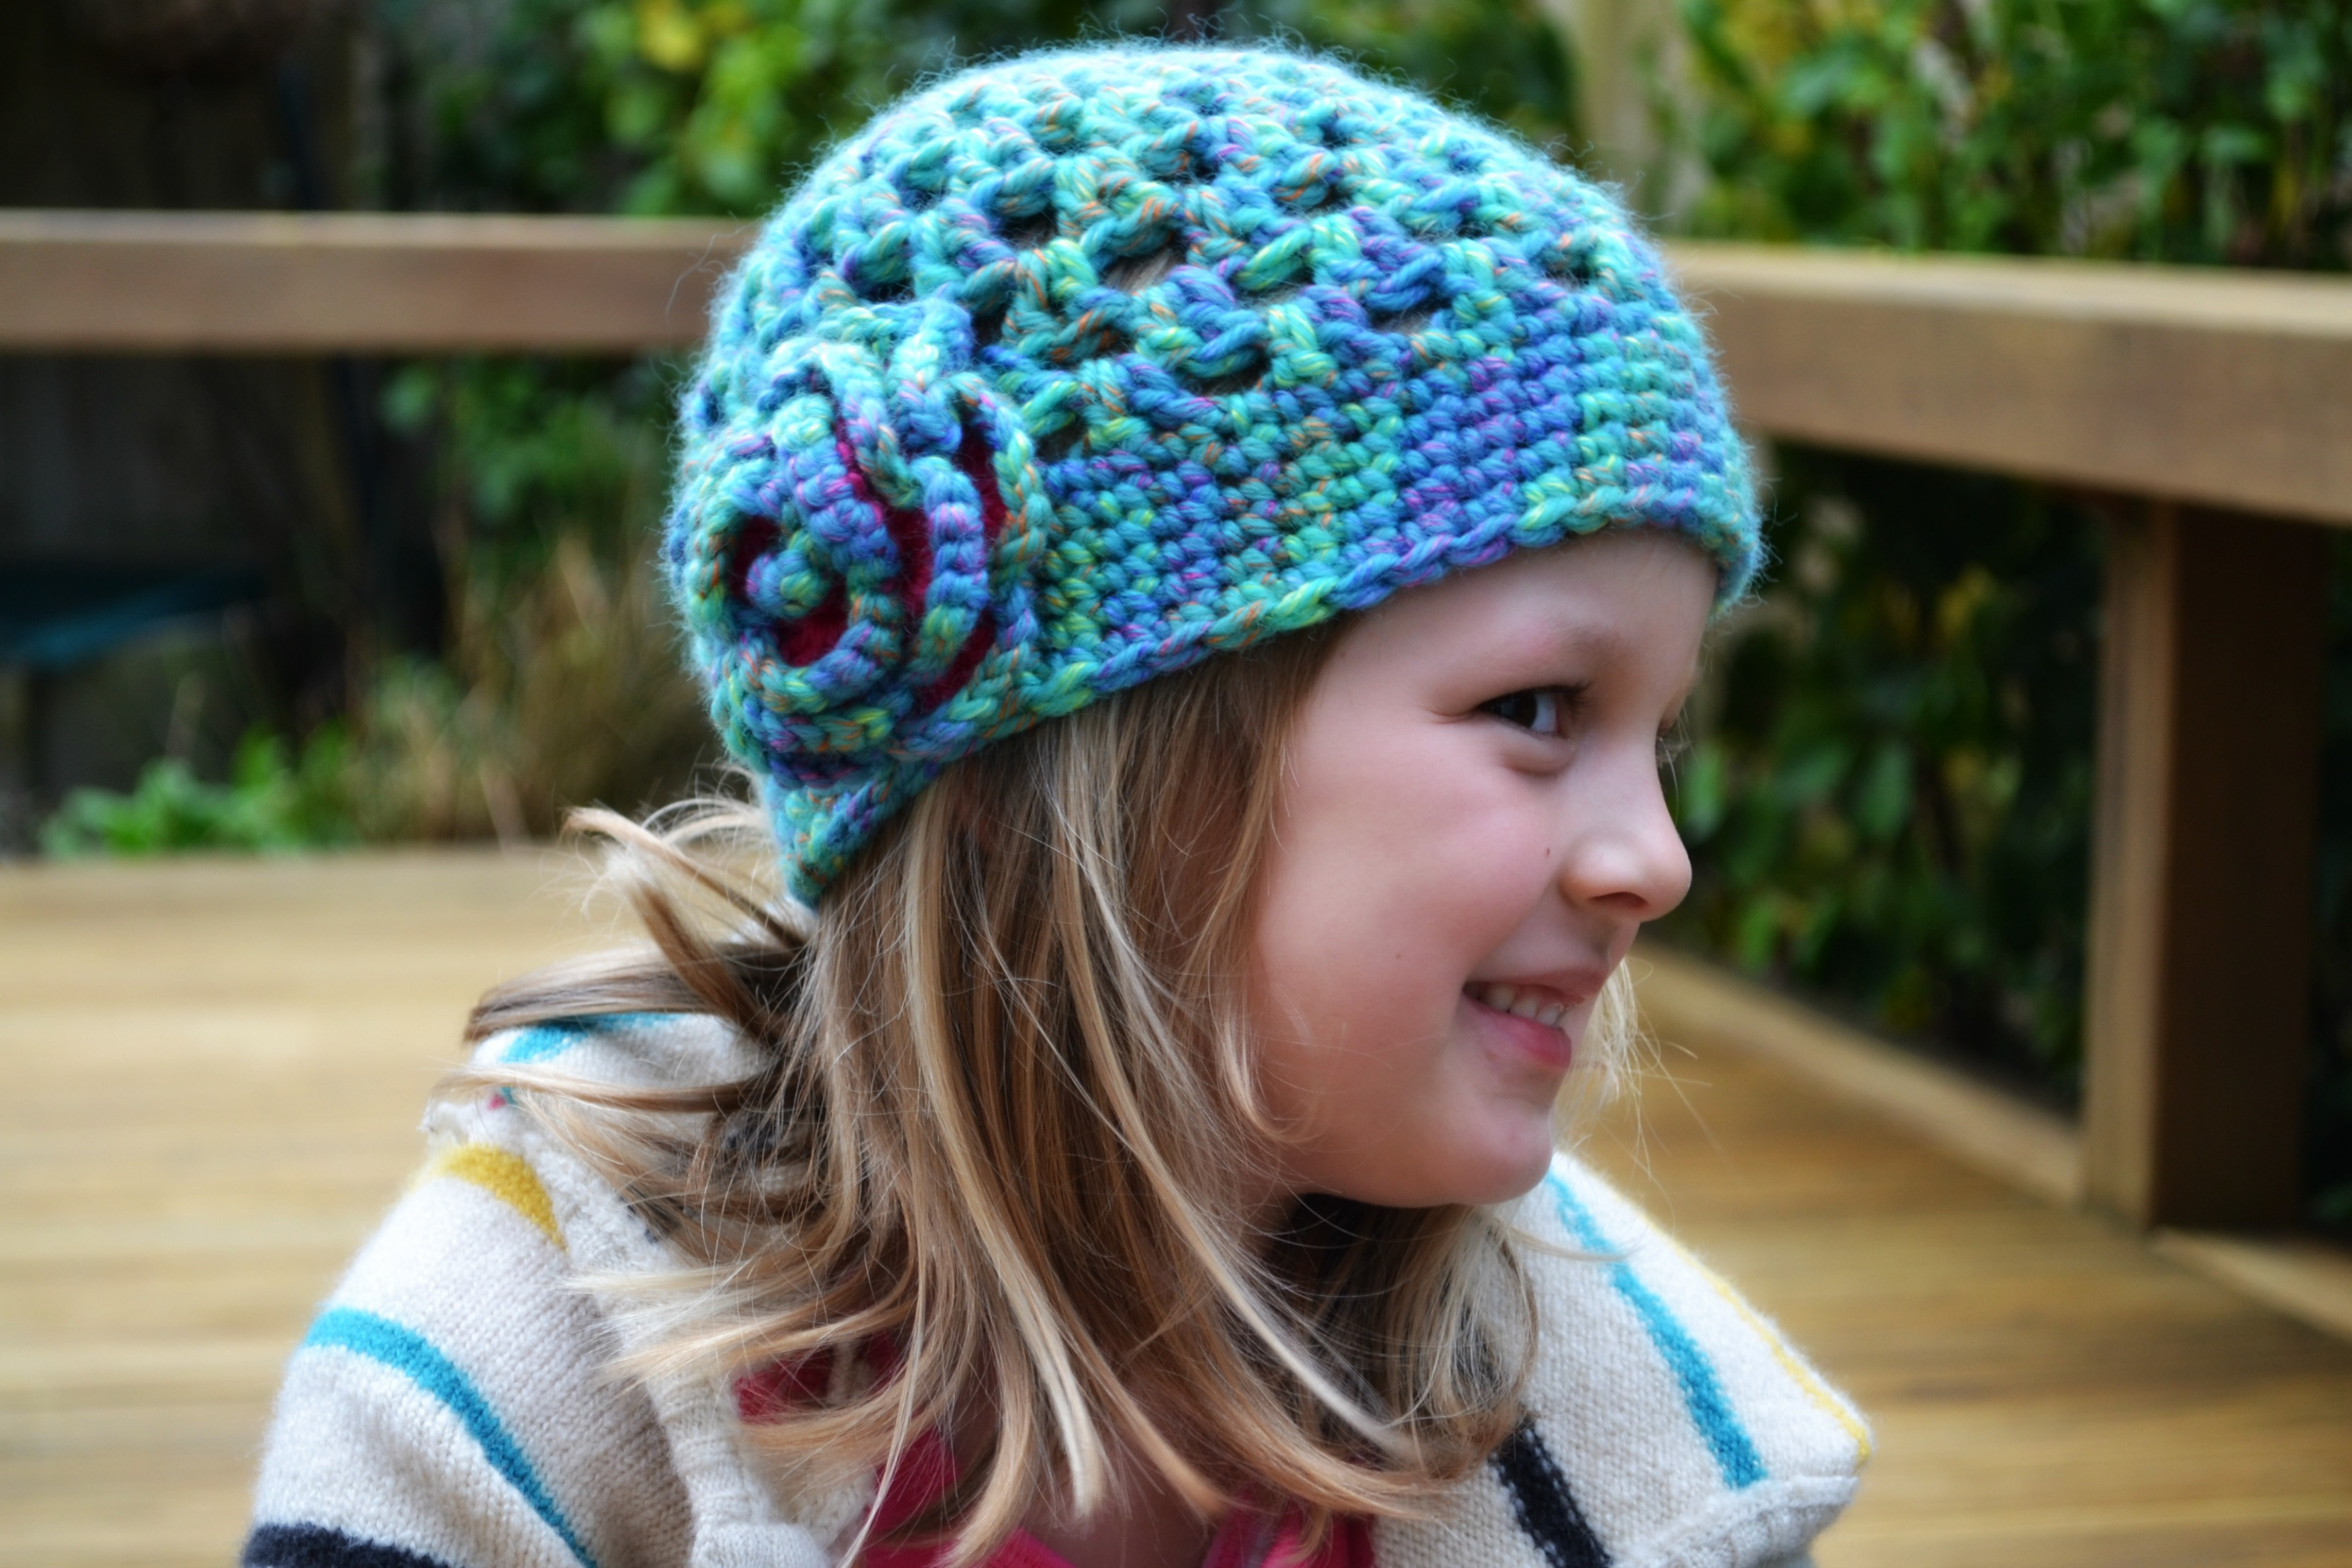 Crochet Winter Hat Free Pattern The Winter Of Hats The Green Dragonfly